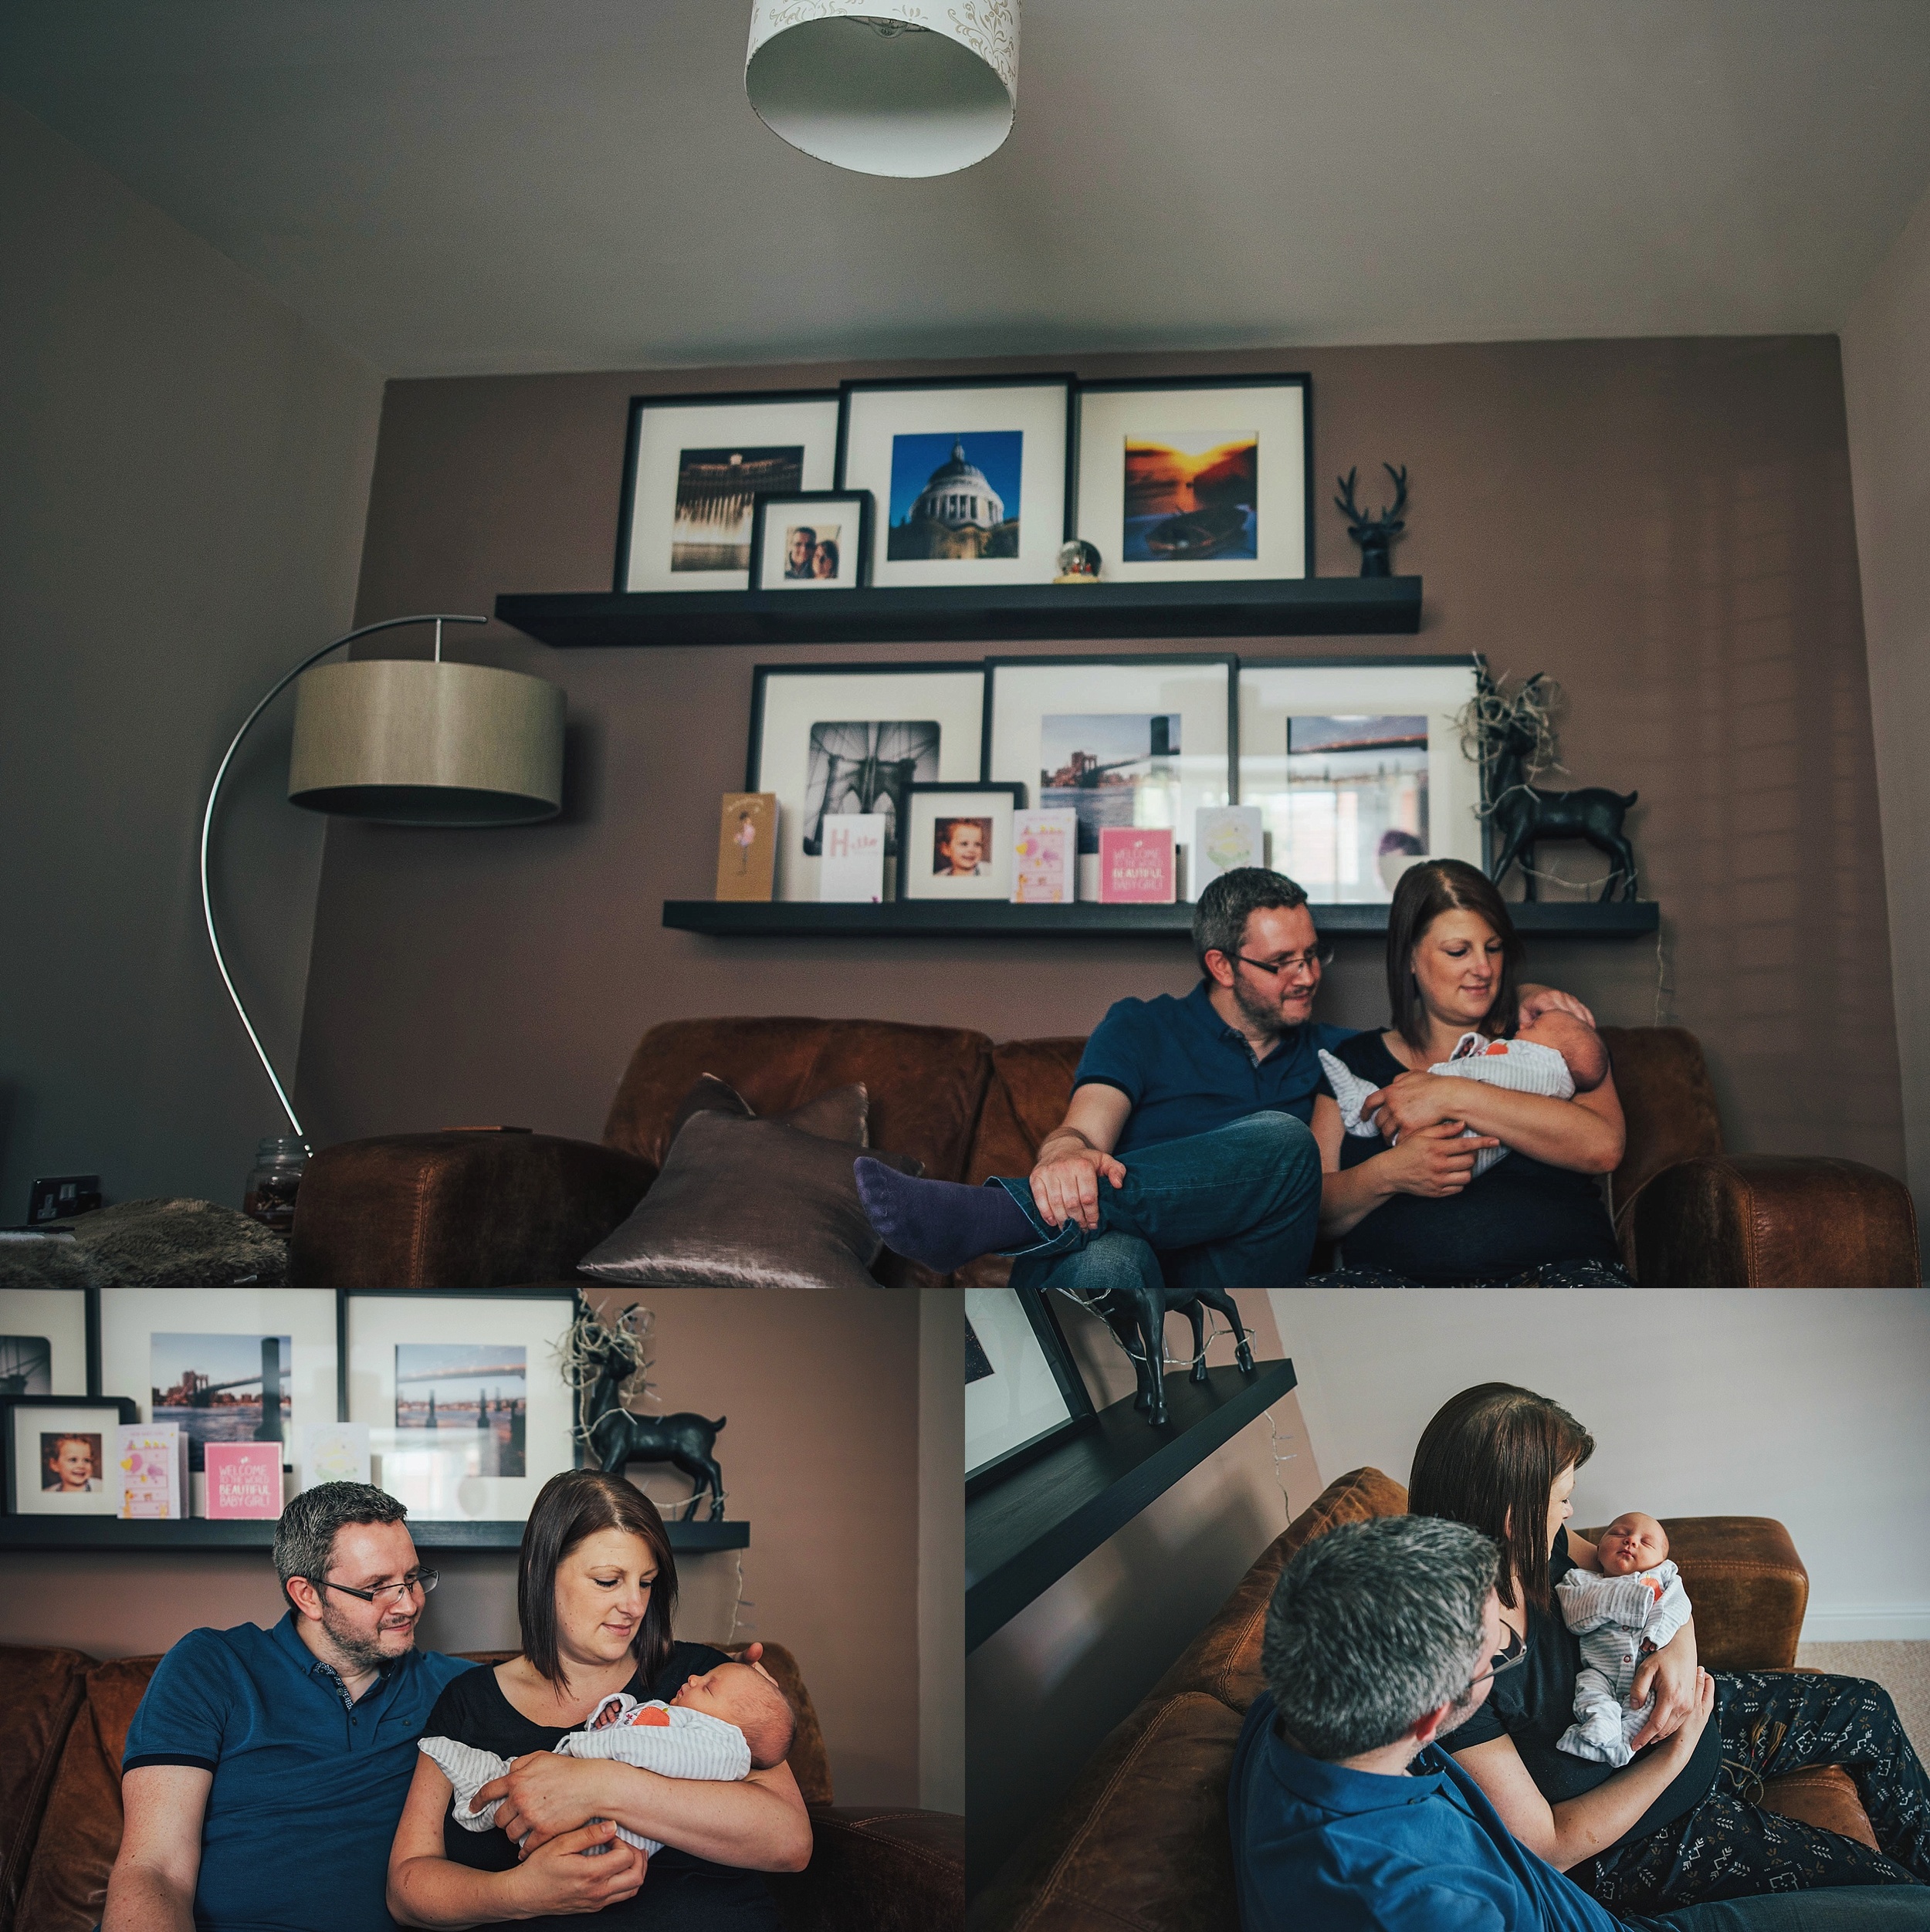 At Home Lifestyle Shoot with Newborn baby Essex UK Documentary Portrait Lifestyle Photographer